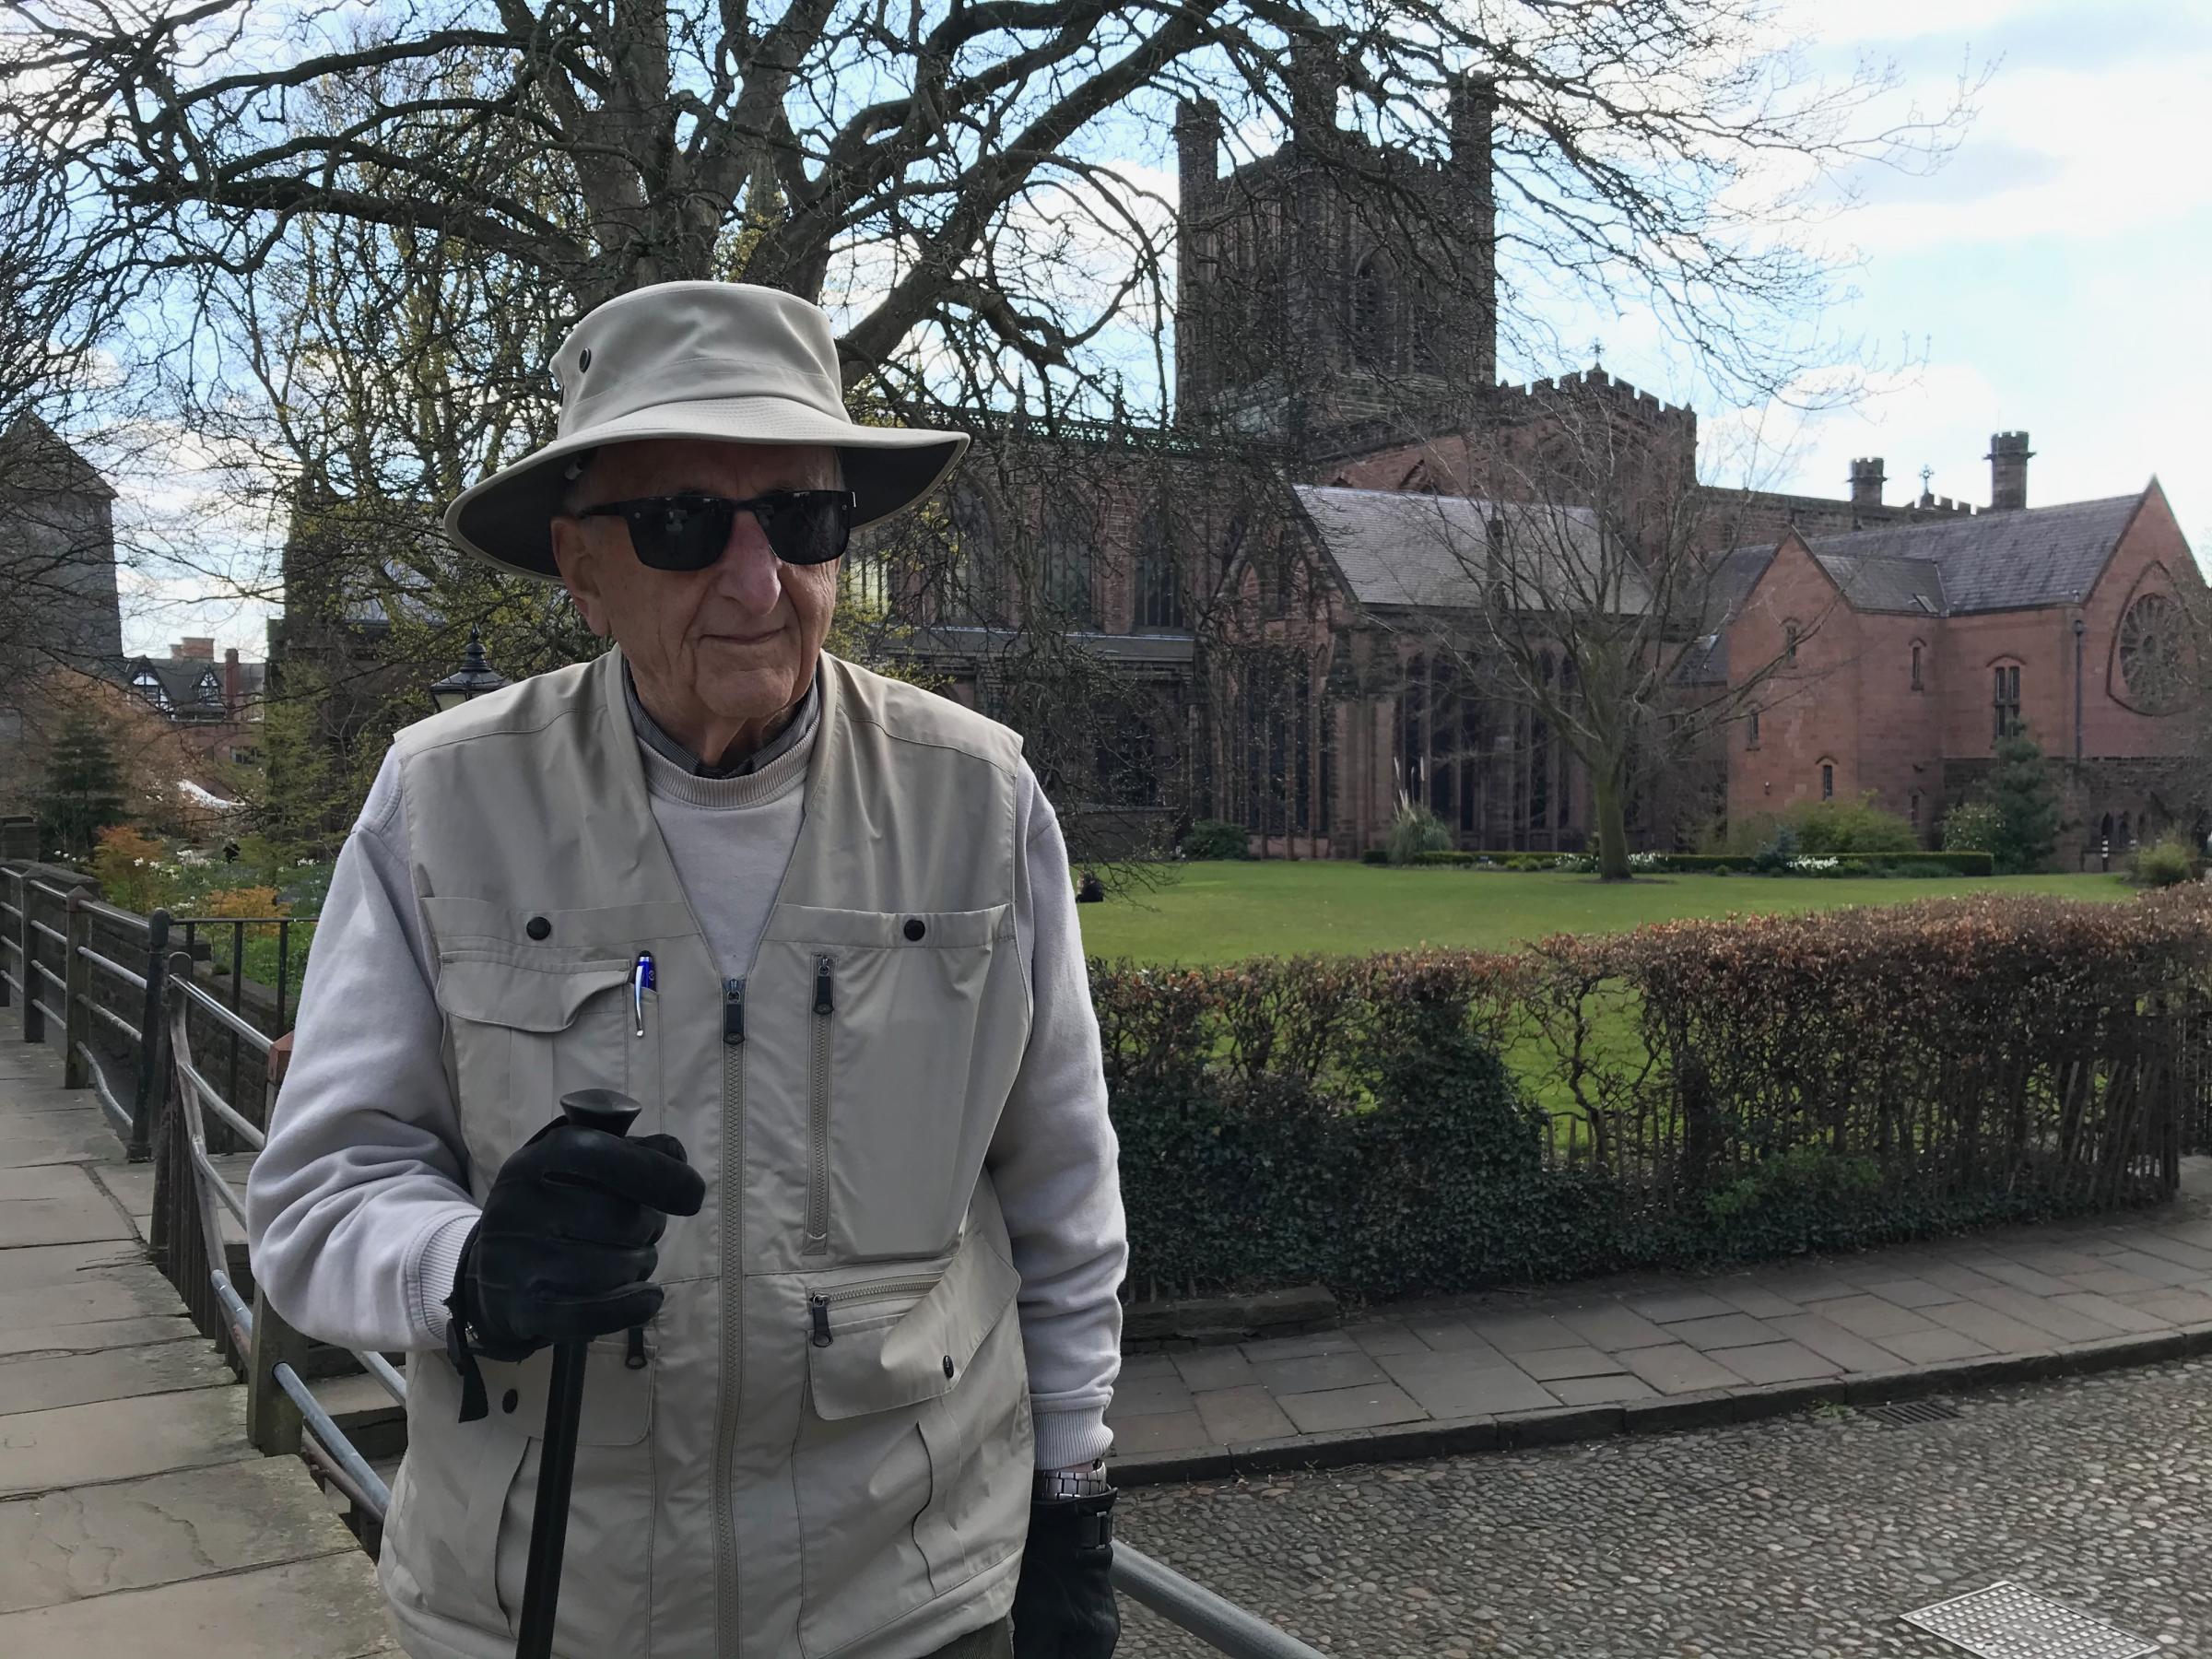 The Reverend Canon John Stanley is aiming to complete 90 laps of Chesters City Walls by his 90th birthday.